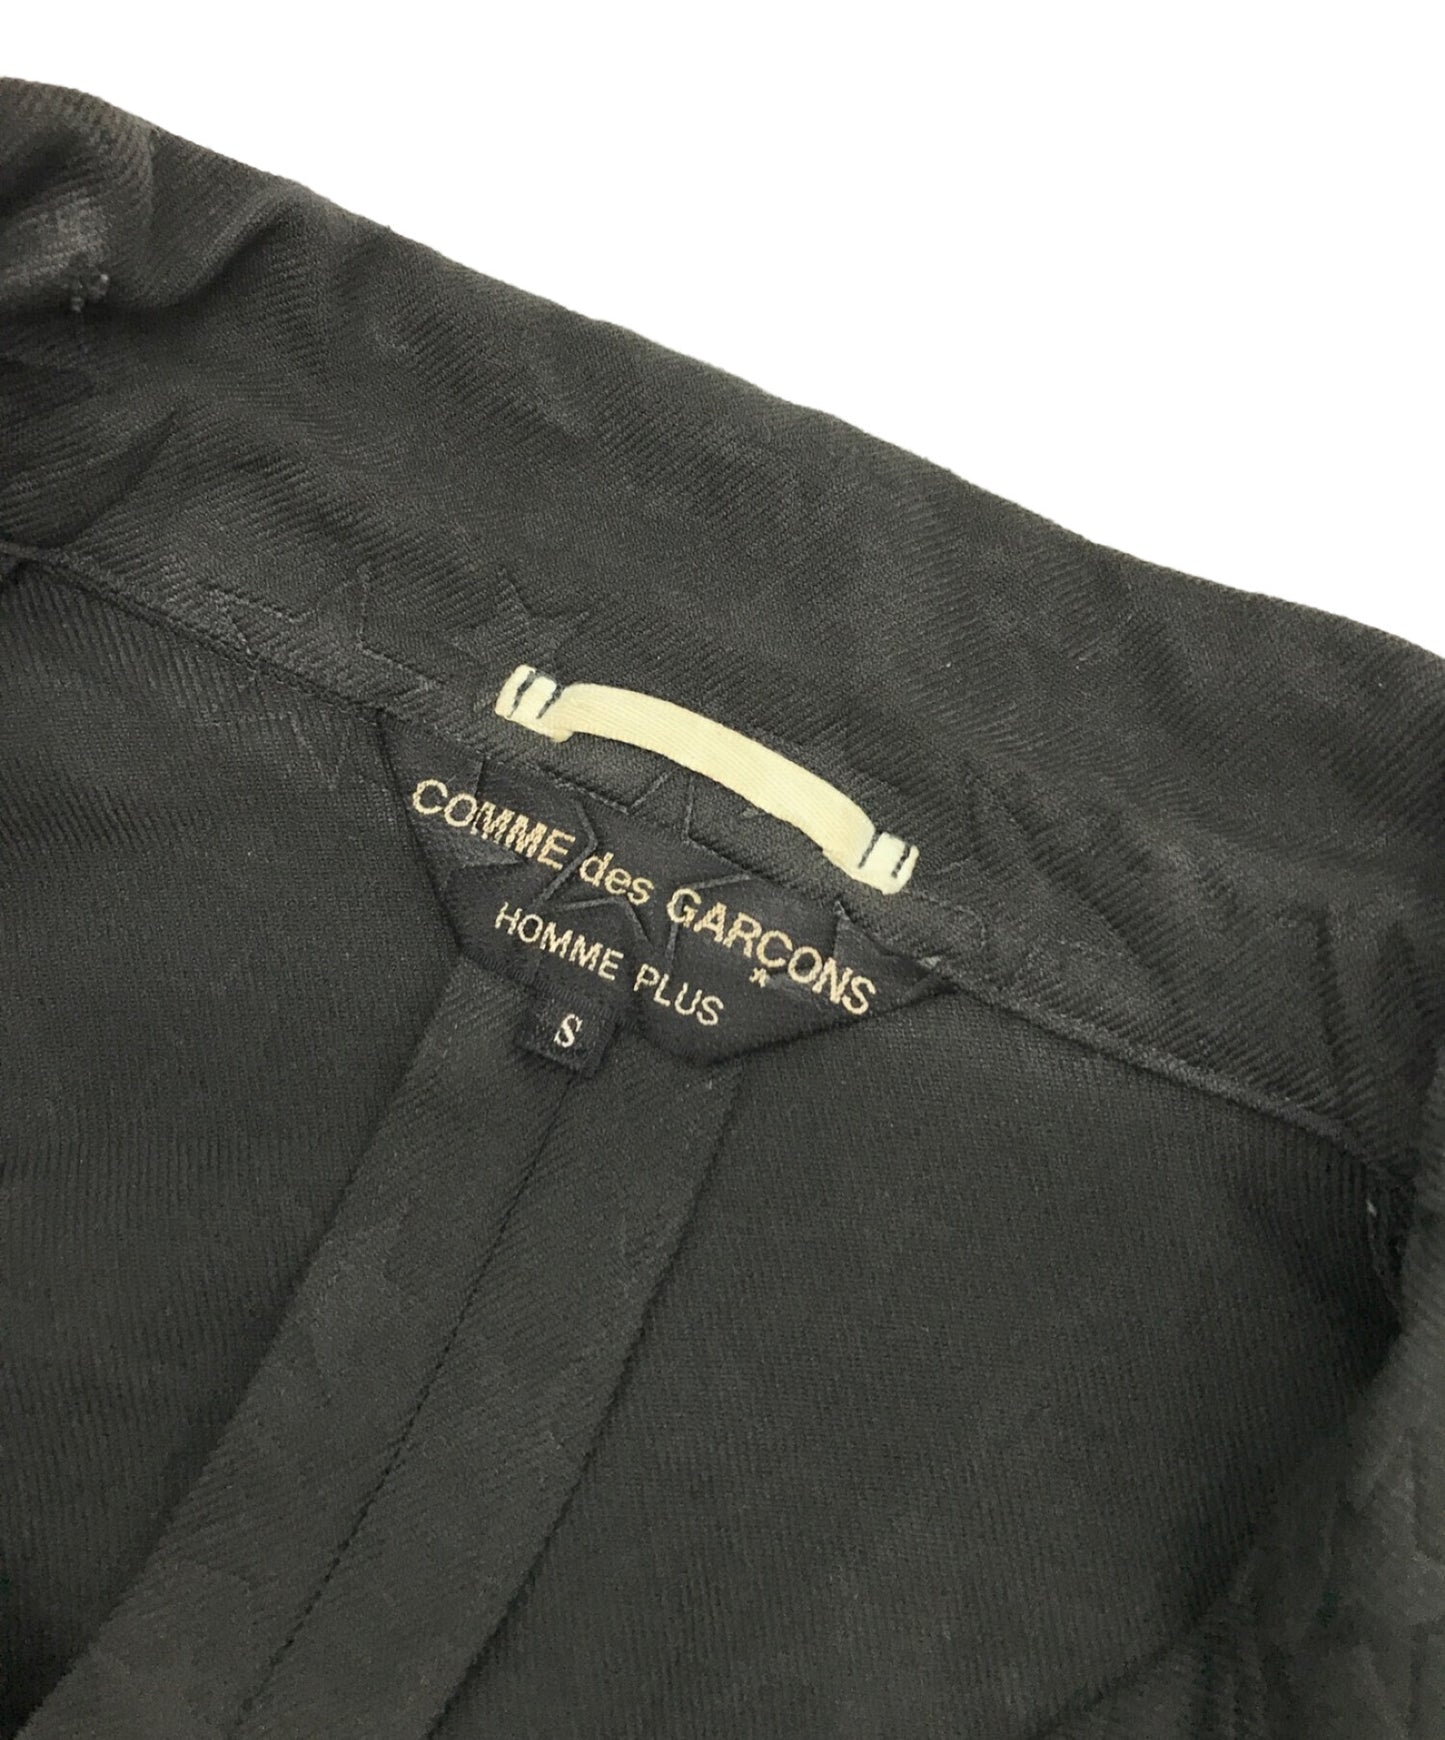 [Pre-owned] COMME des GARCONS HOMME PLUS AD2002 Star-finished tailored jacket, stand collar, mode PI-J100